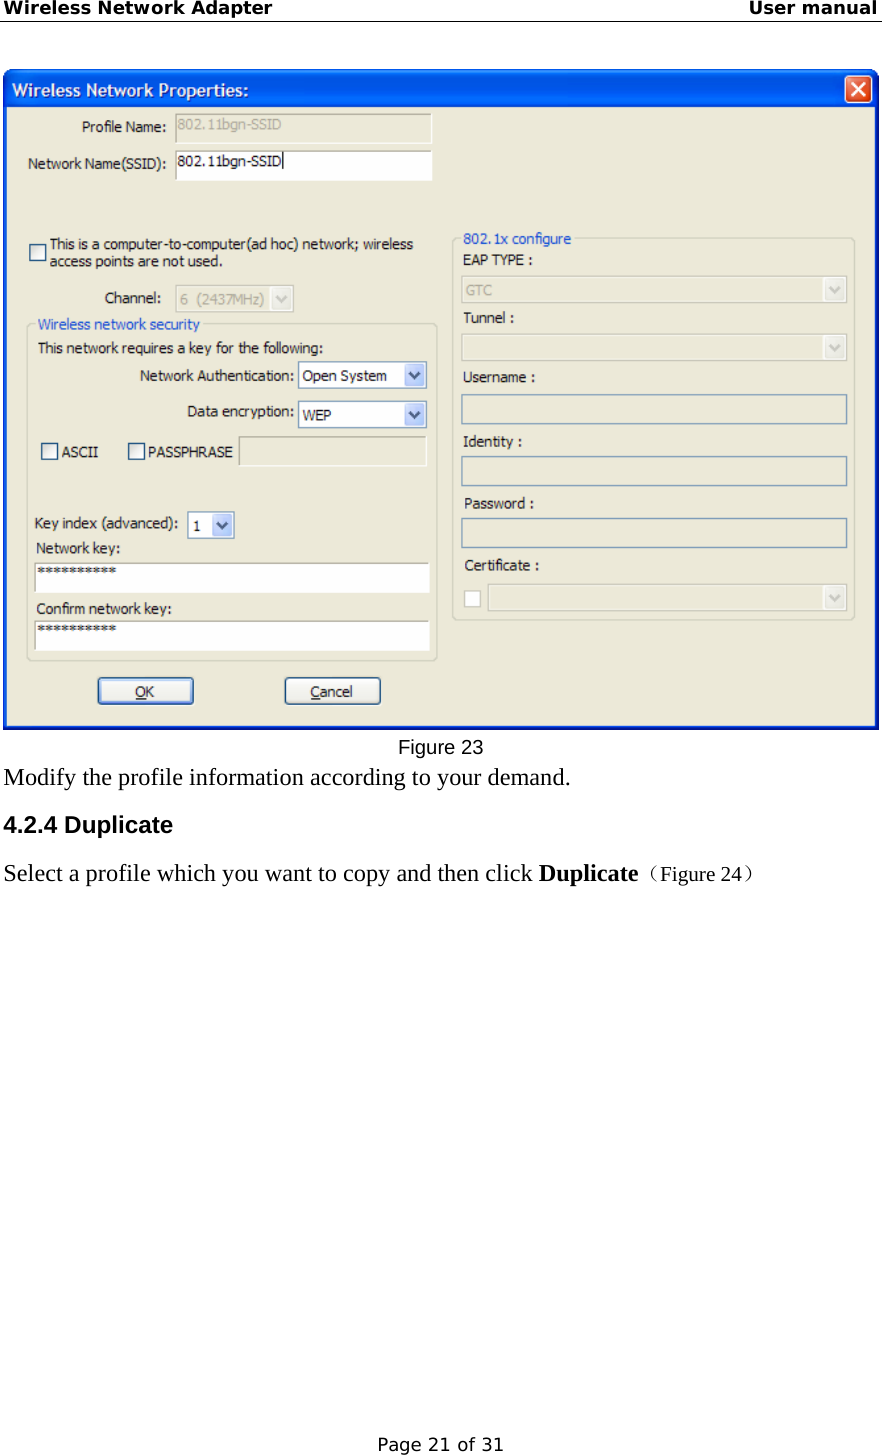 Wireless Network Adapter                                                    User manual Page 21 of 31  Figure 23 Modify the profile information according to your demand. 4.2.4 Duplicate Select a profile which you want to copy and then click Duplicate（Figure 24） 